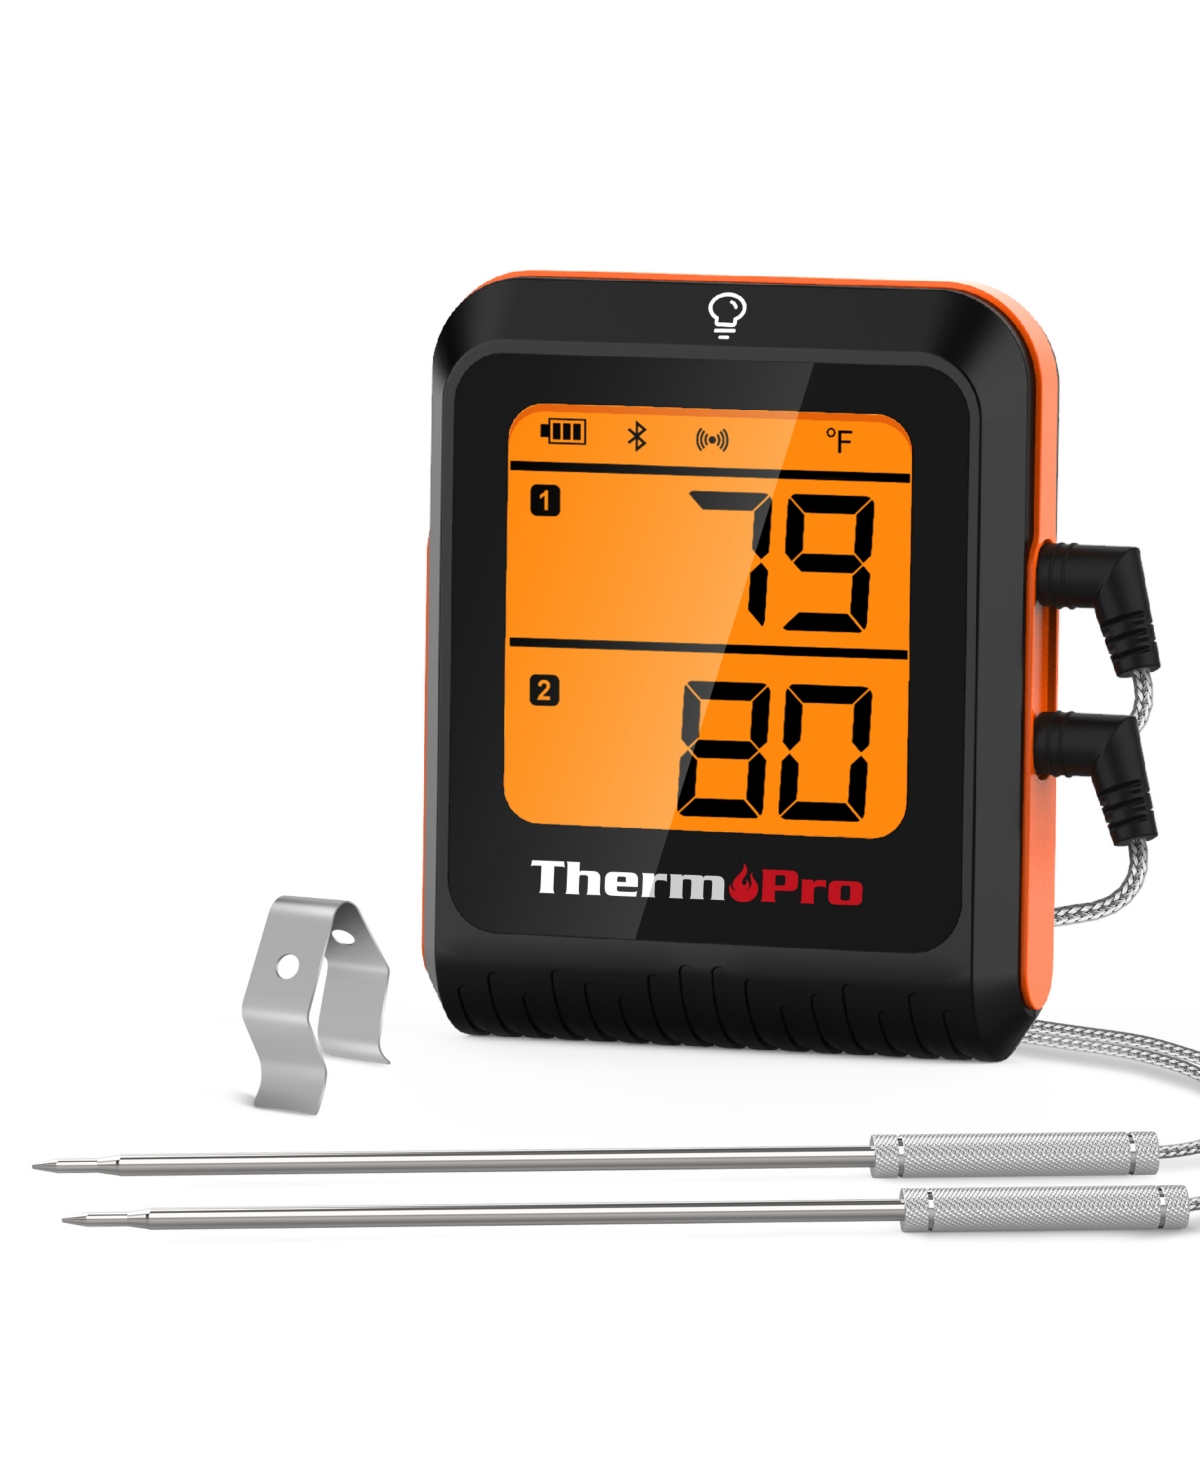 Thermopro Pack Of 1 Tp920w 500' Range Smart Bluetooth Meat Food Thermometer In Black